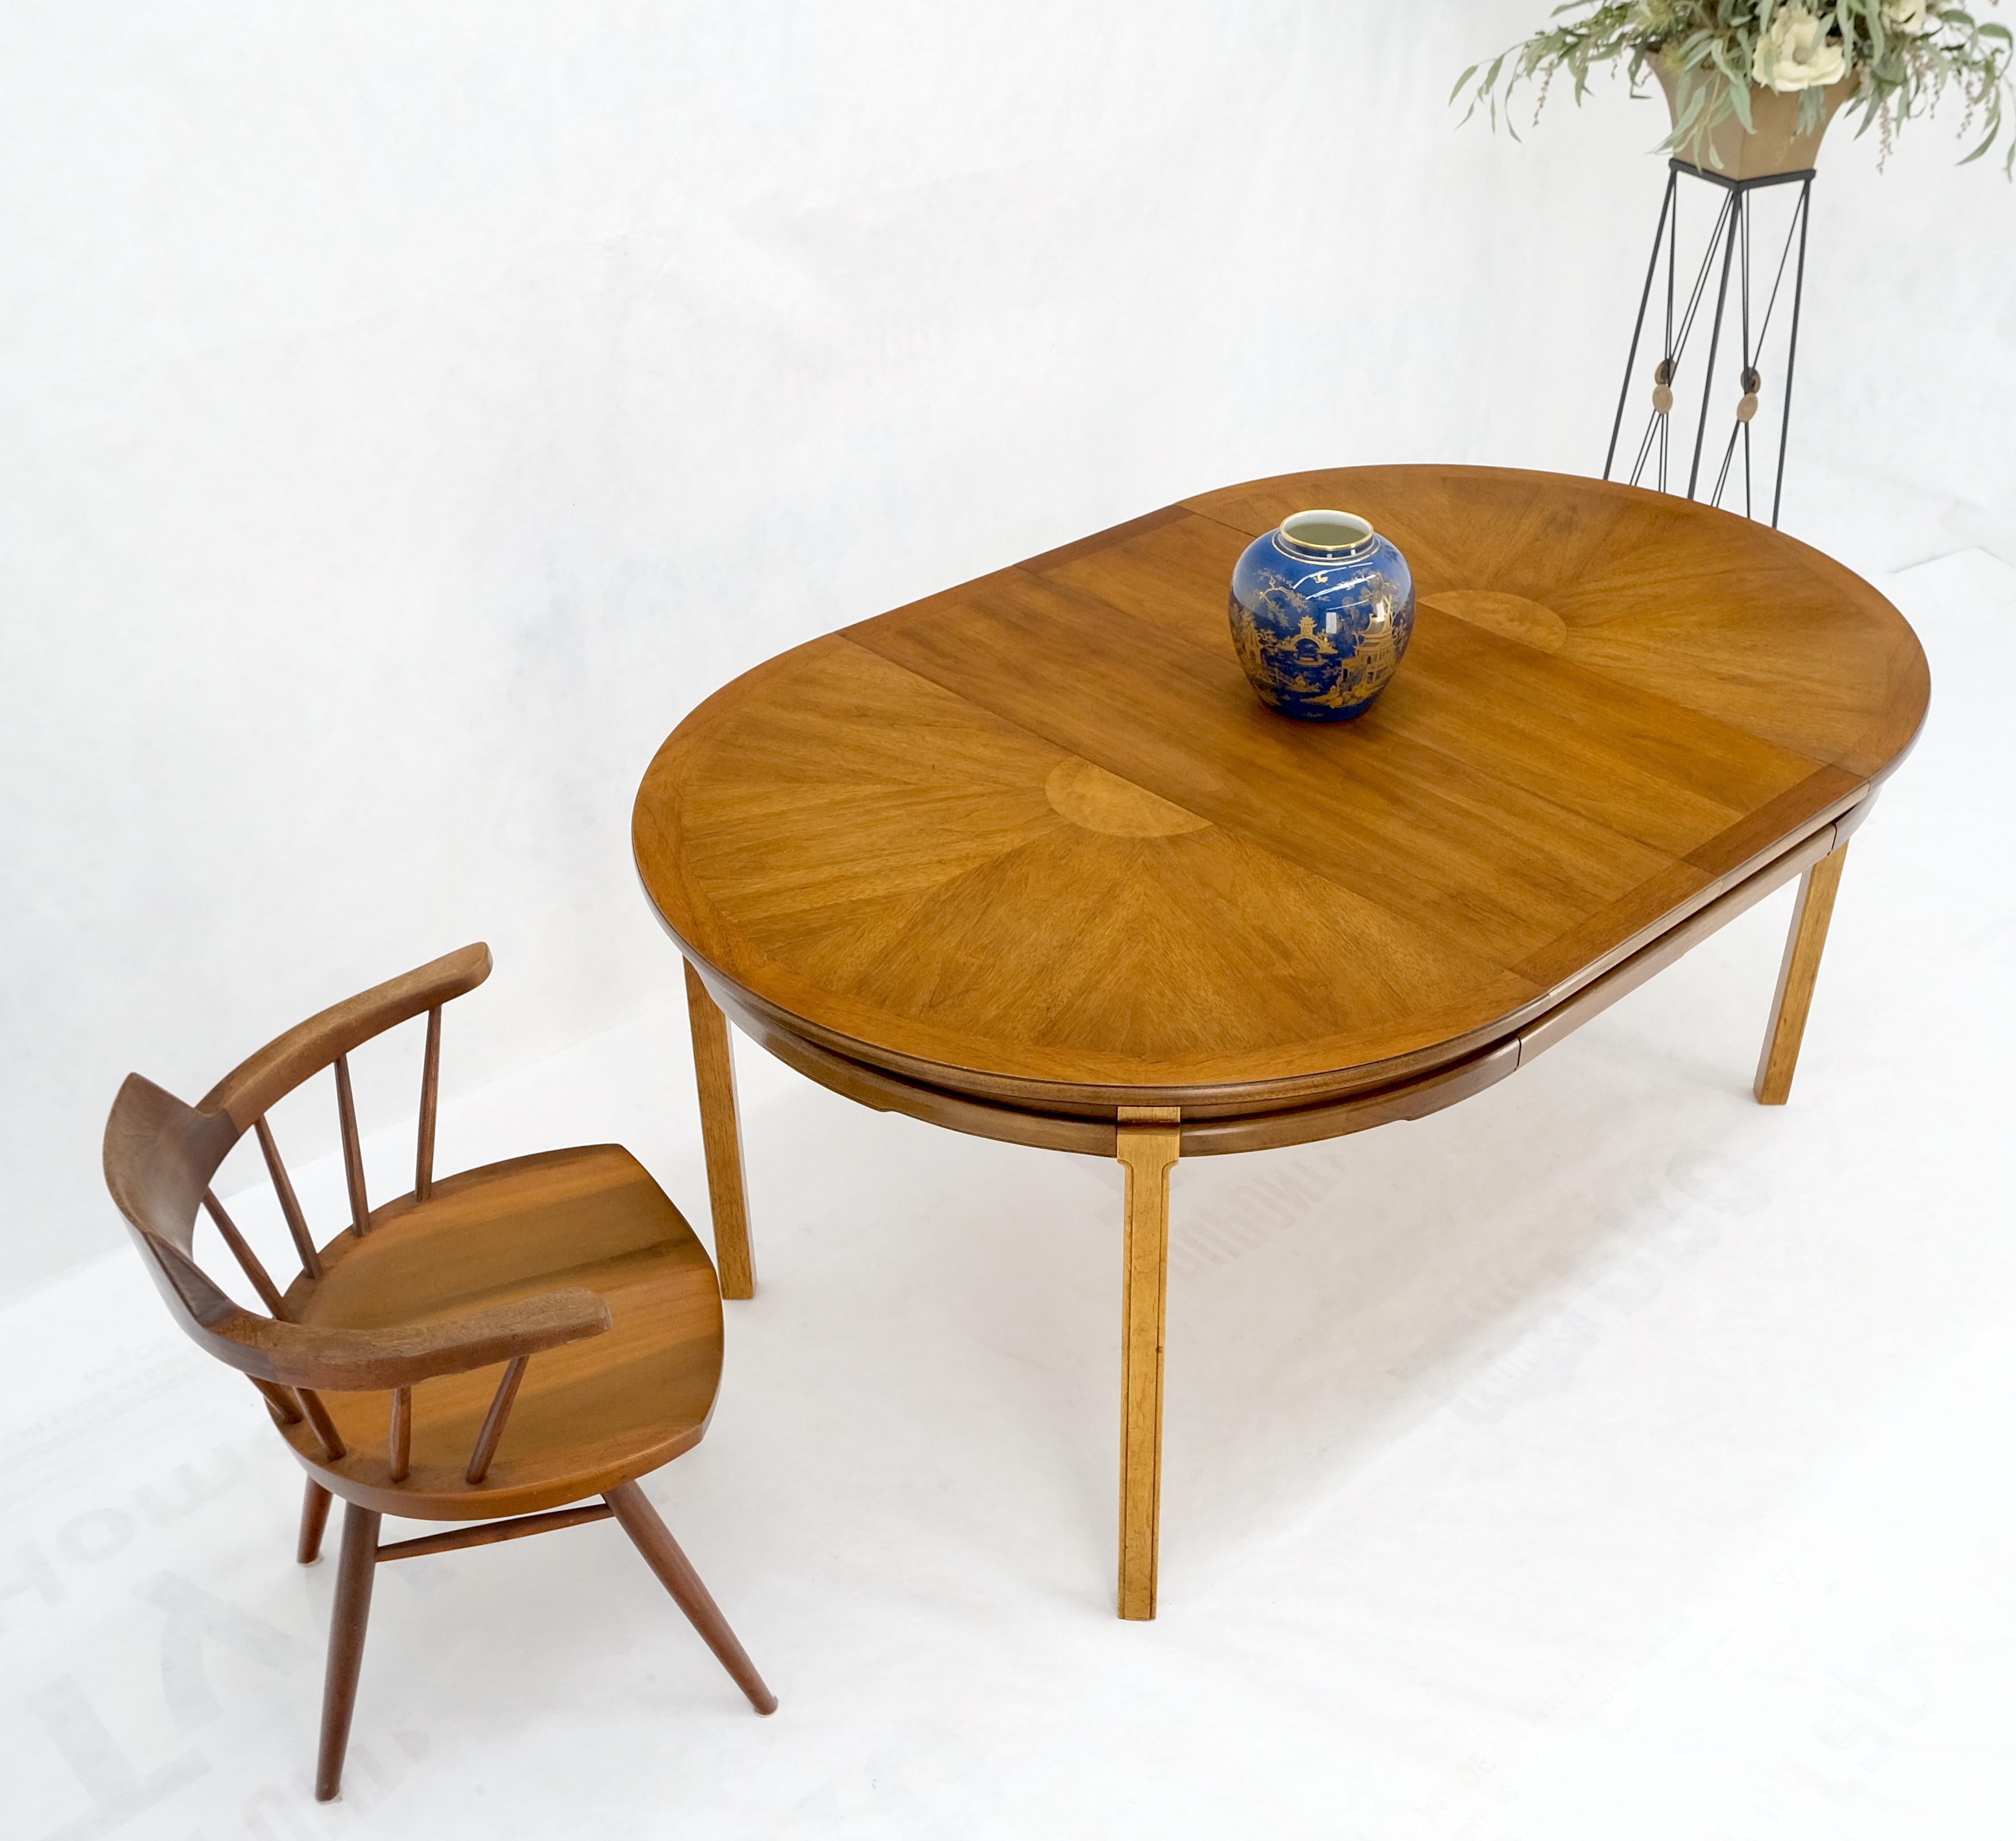 Round Sunburst Pattern Mid-Century Modern Dining Table with Two Leaves Mint In Good Condition For Sale In Rockaway, NJ